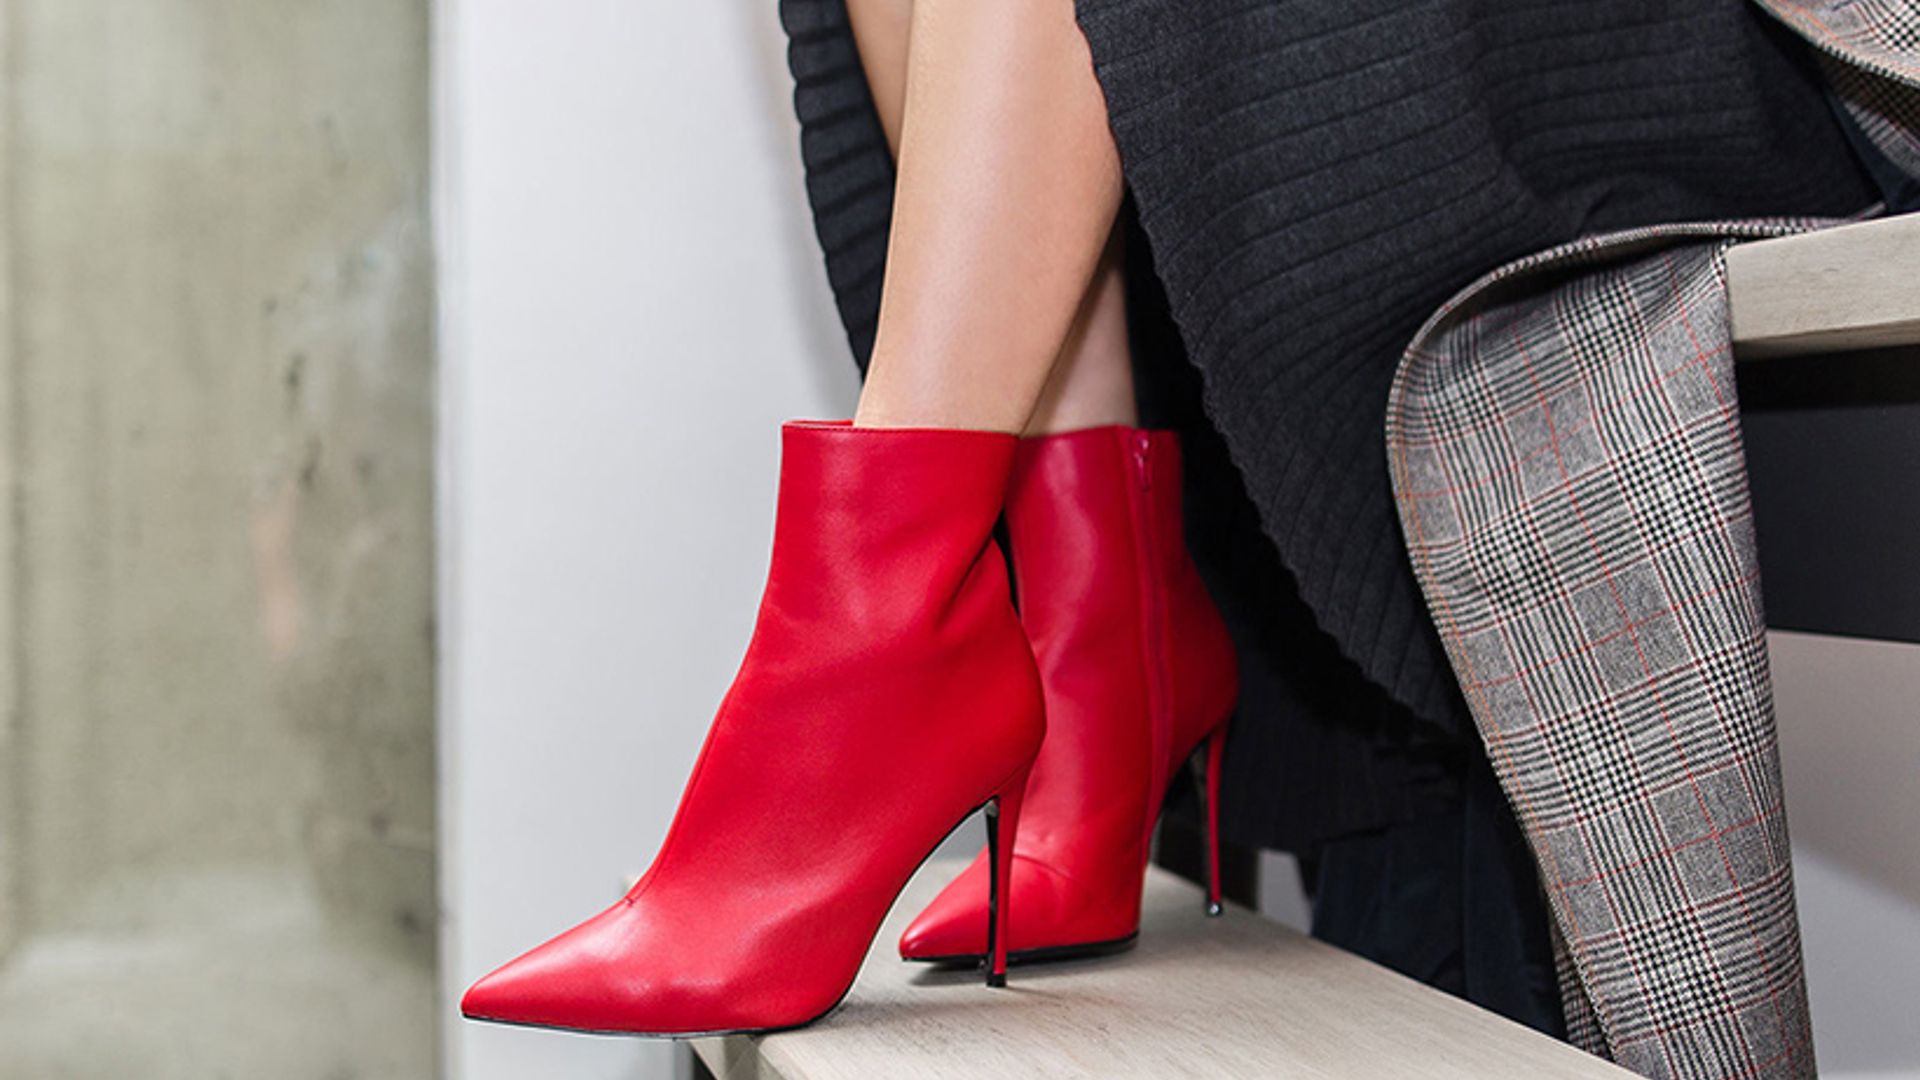 Gucci - Black Suede Red Heel Ankle Boots 37 | www.luxurybags.eu